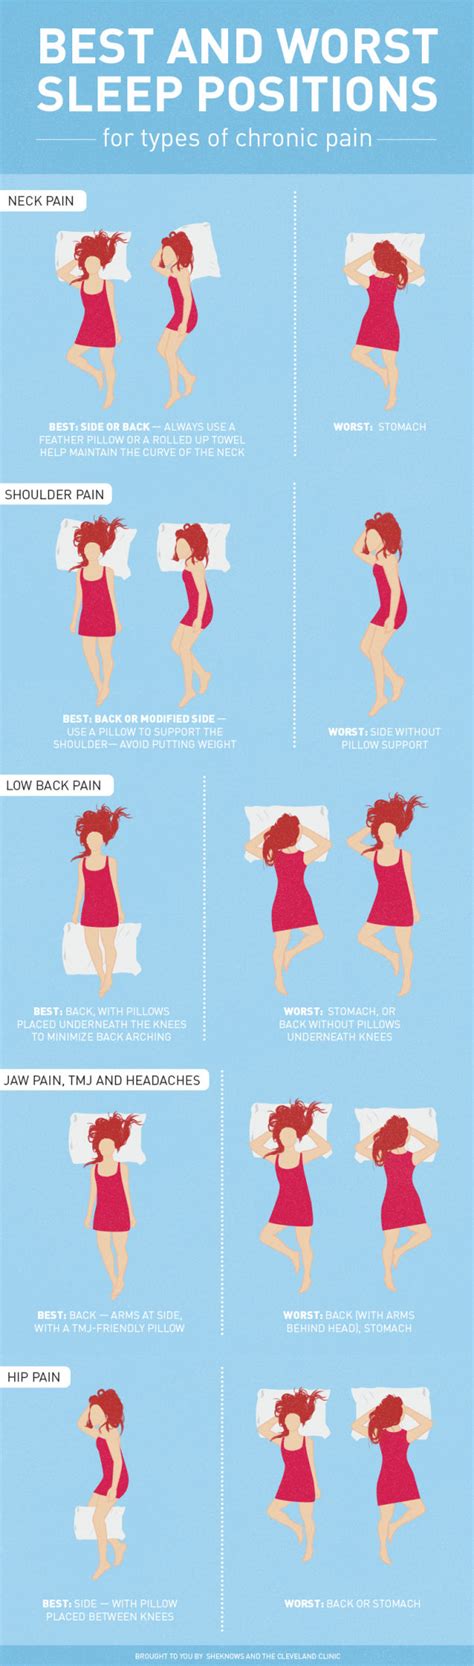 The Graphic Shows The Best And Worst Sleeping Positions